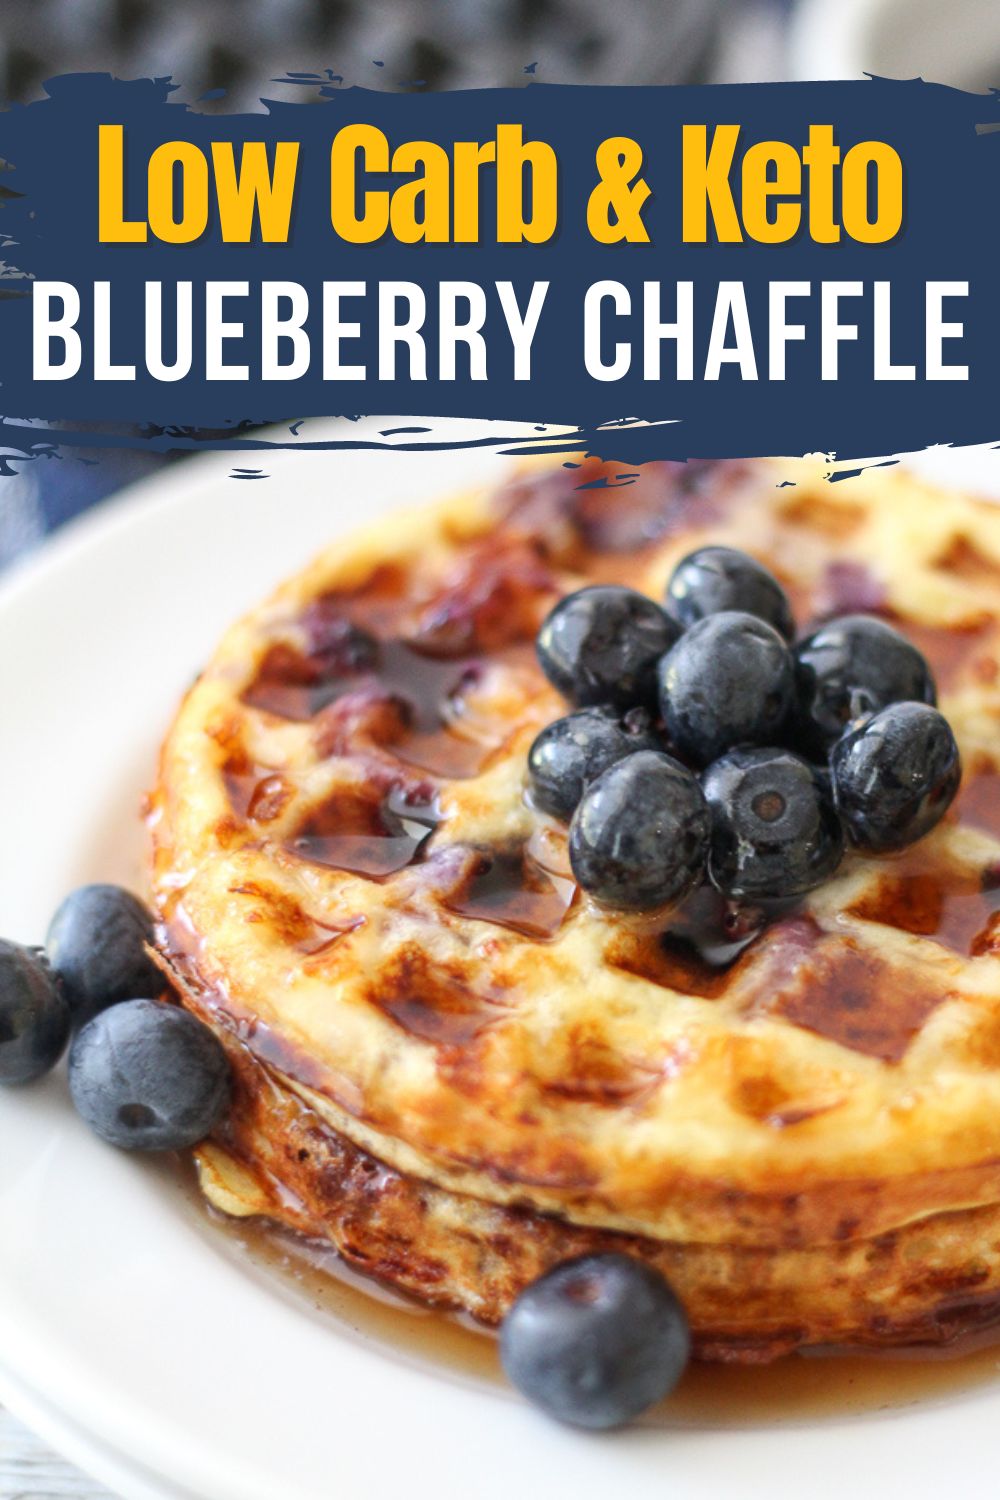 image of blueberry chaffle topped with addittional blueberries and sugar-free maple syrup